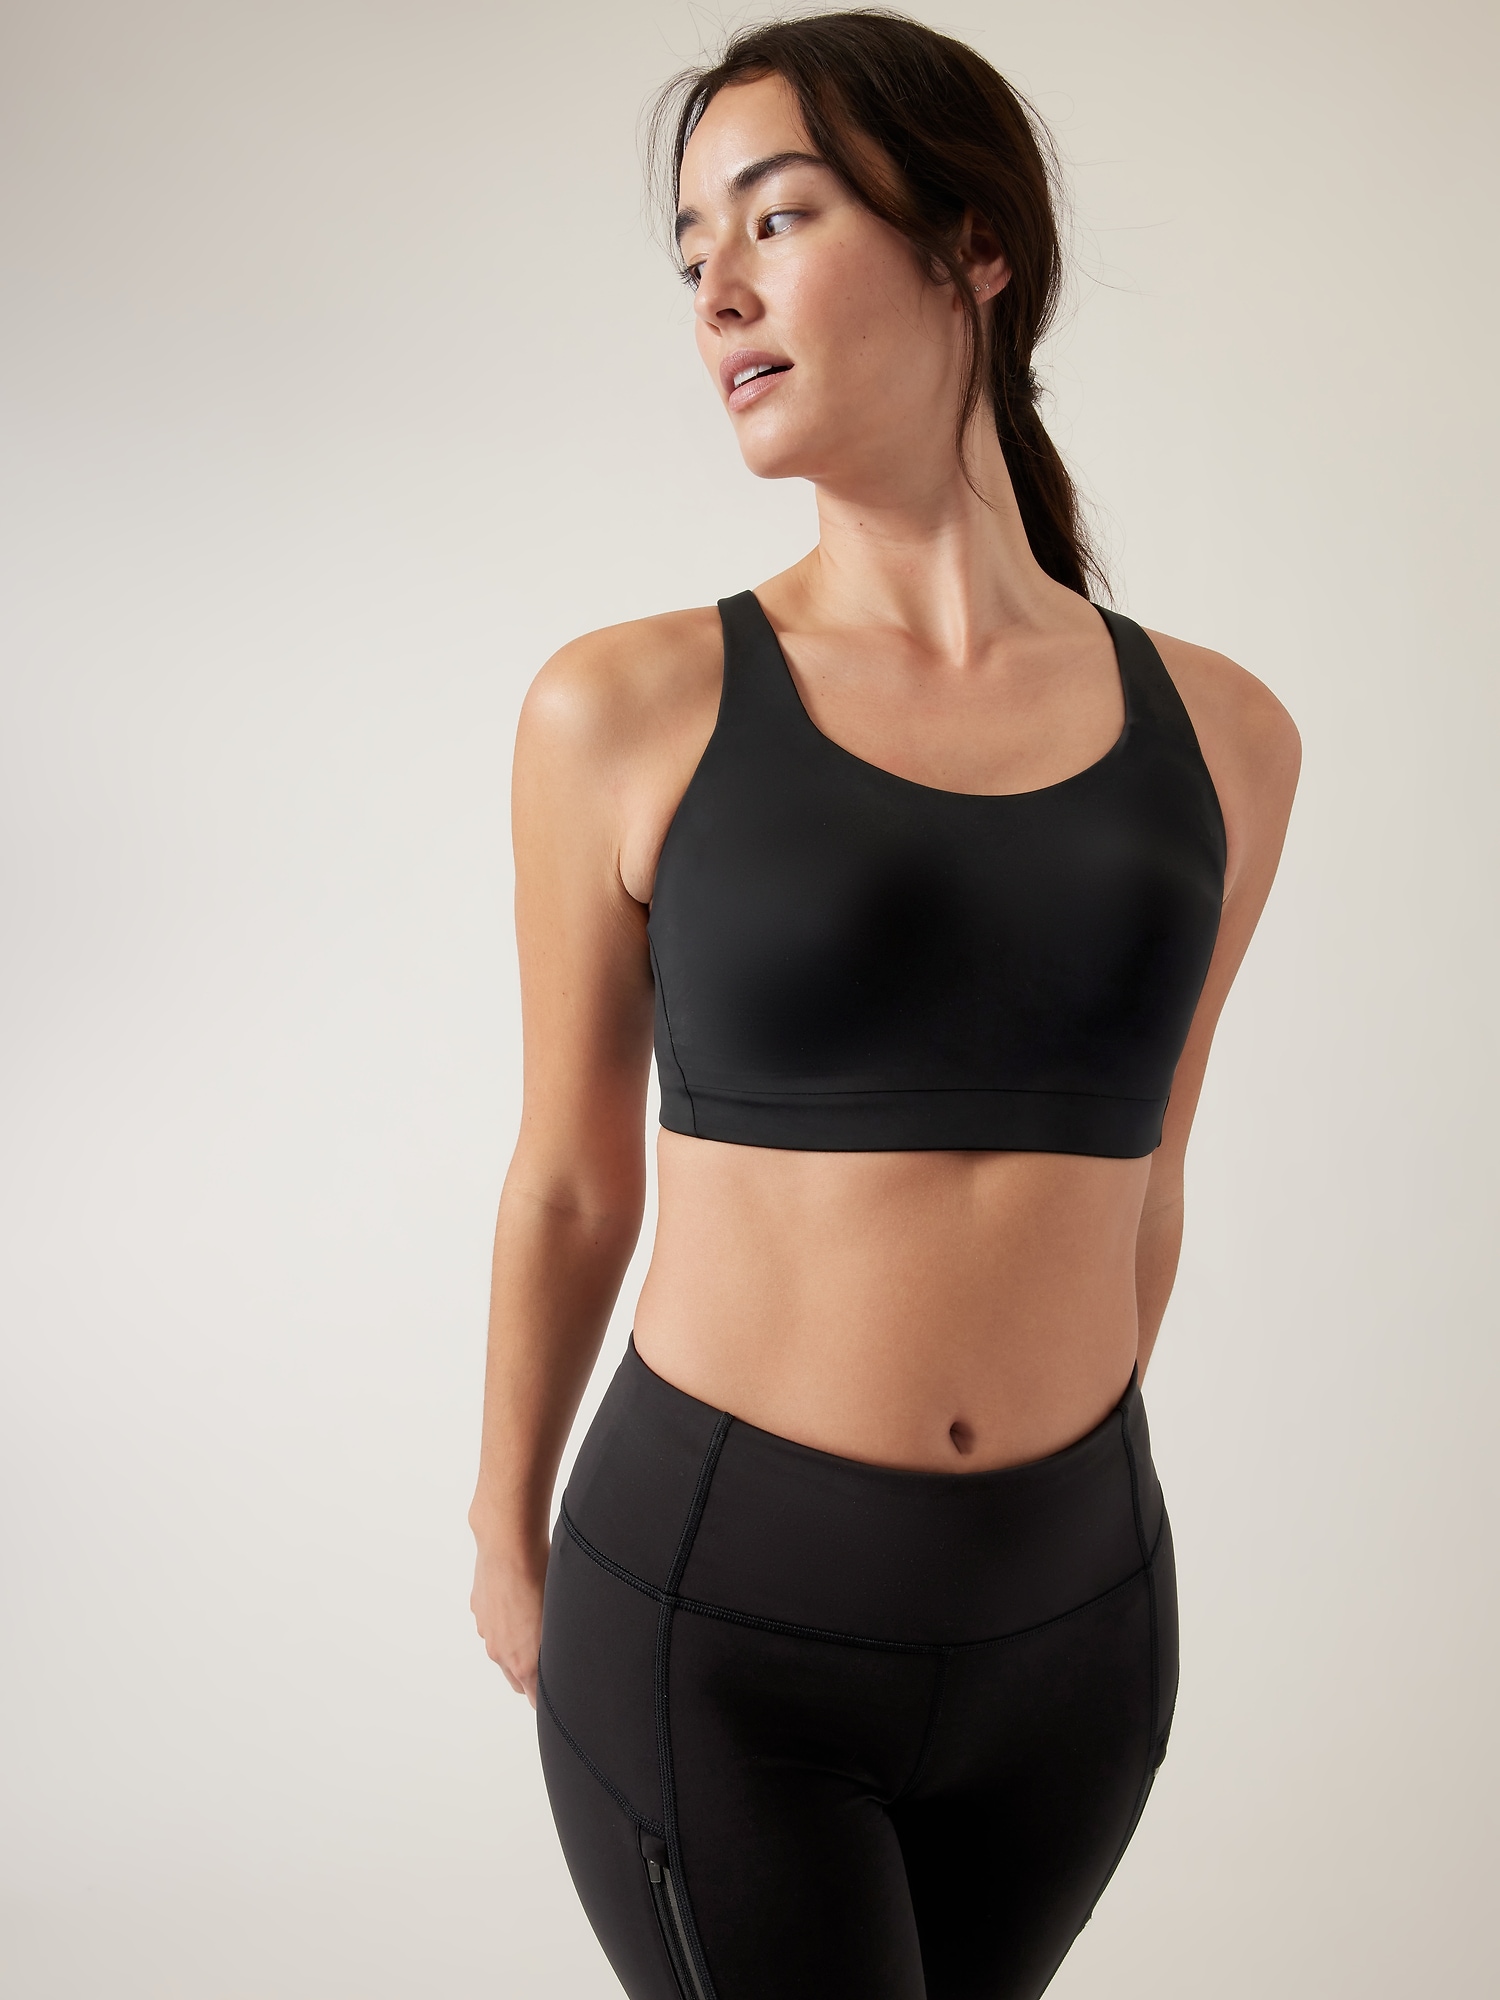 I'm a 32G and used to work at Lululemon - these are the best